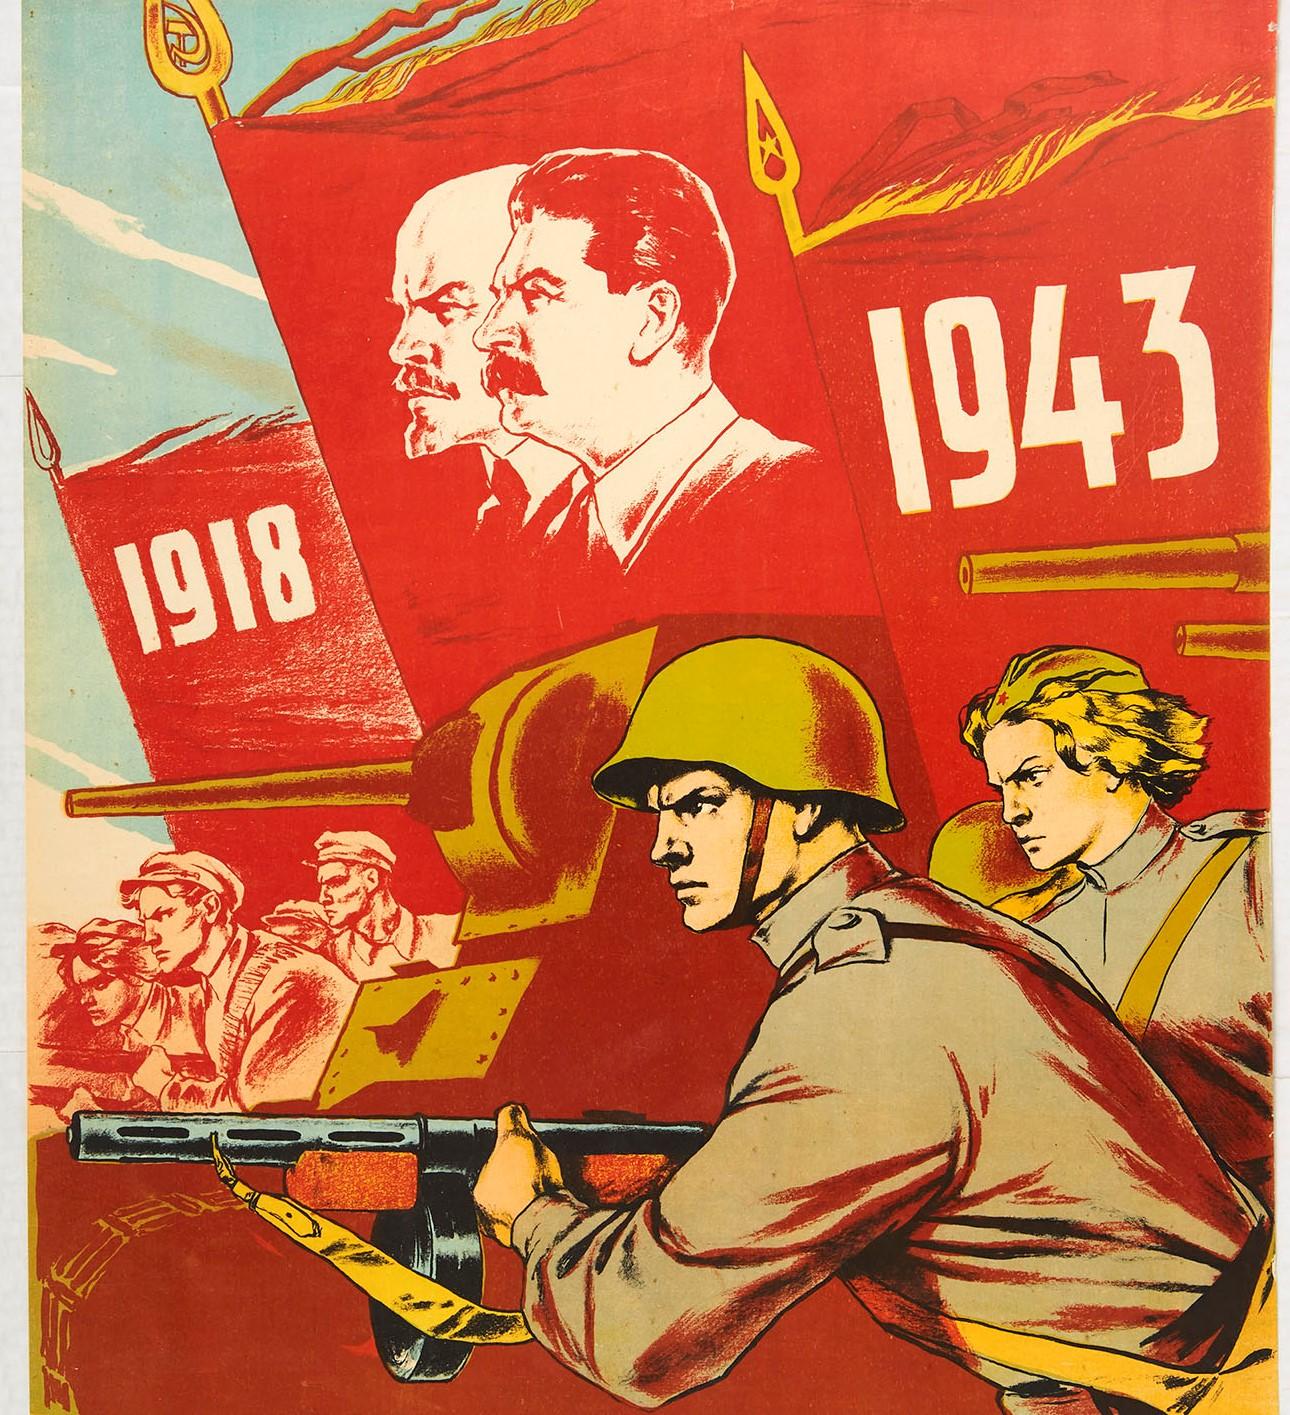 Original vintage World War Two Soviet propaganda poster - Long Live the 25th Anniversary of the Leninist-Stalinist Komsomol! Dynamic artwork depicting soldiers and workers marching forward into battle armed with their rifle guns and weapons next to